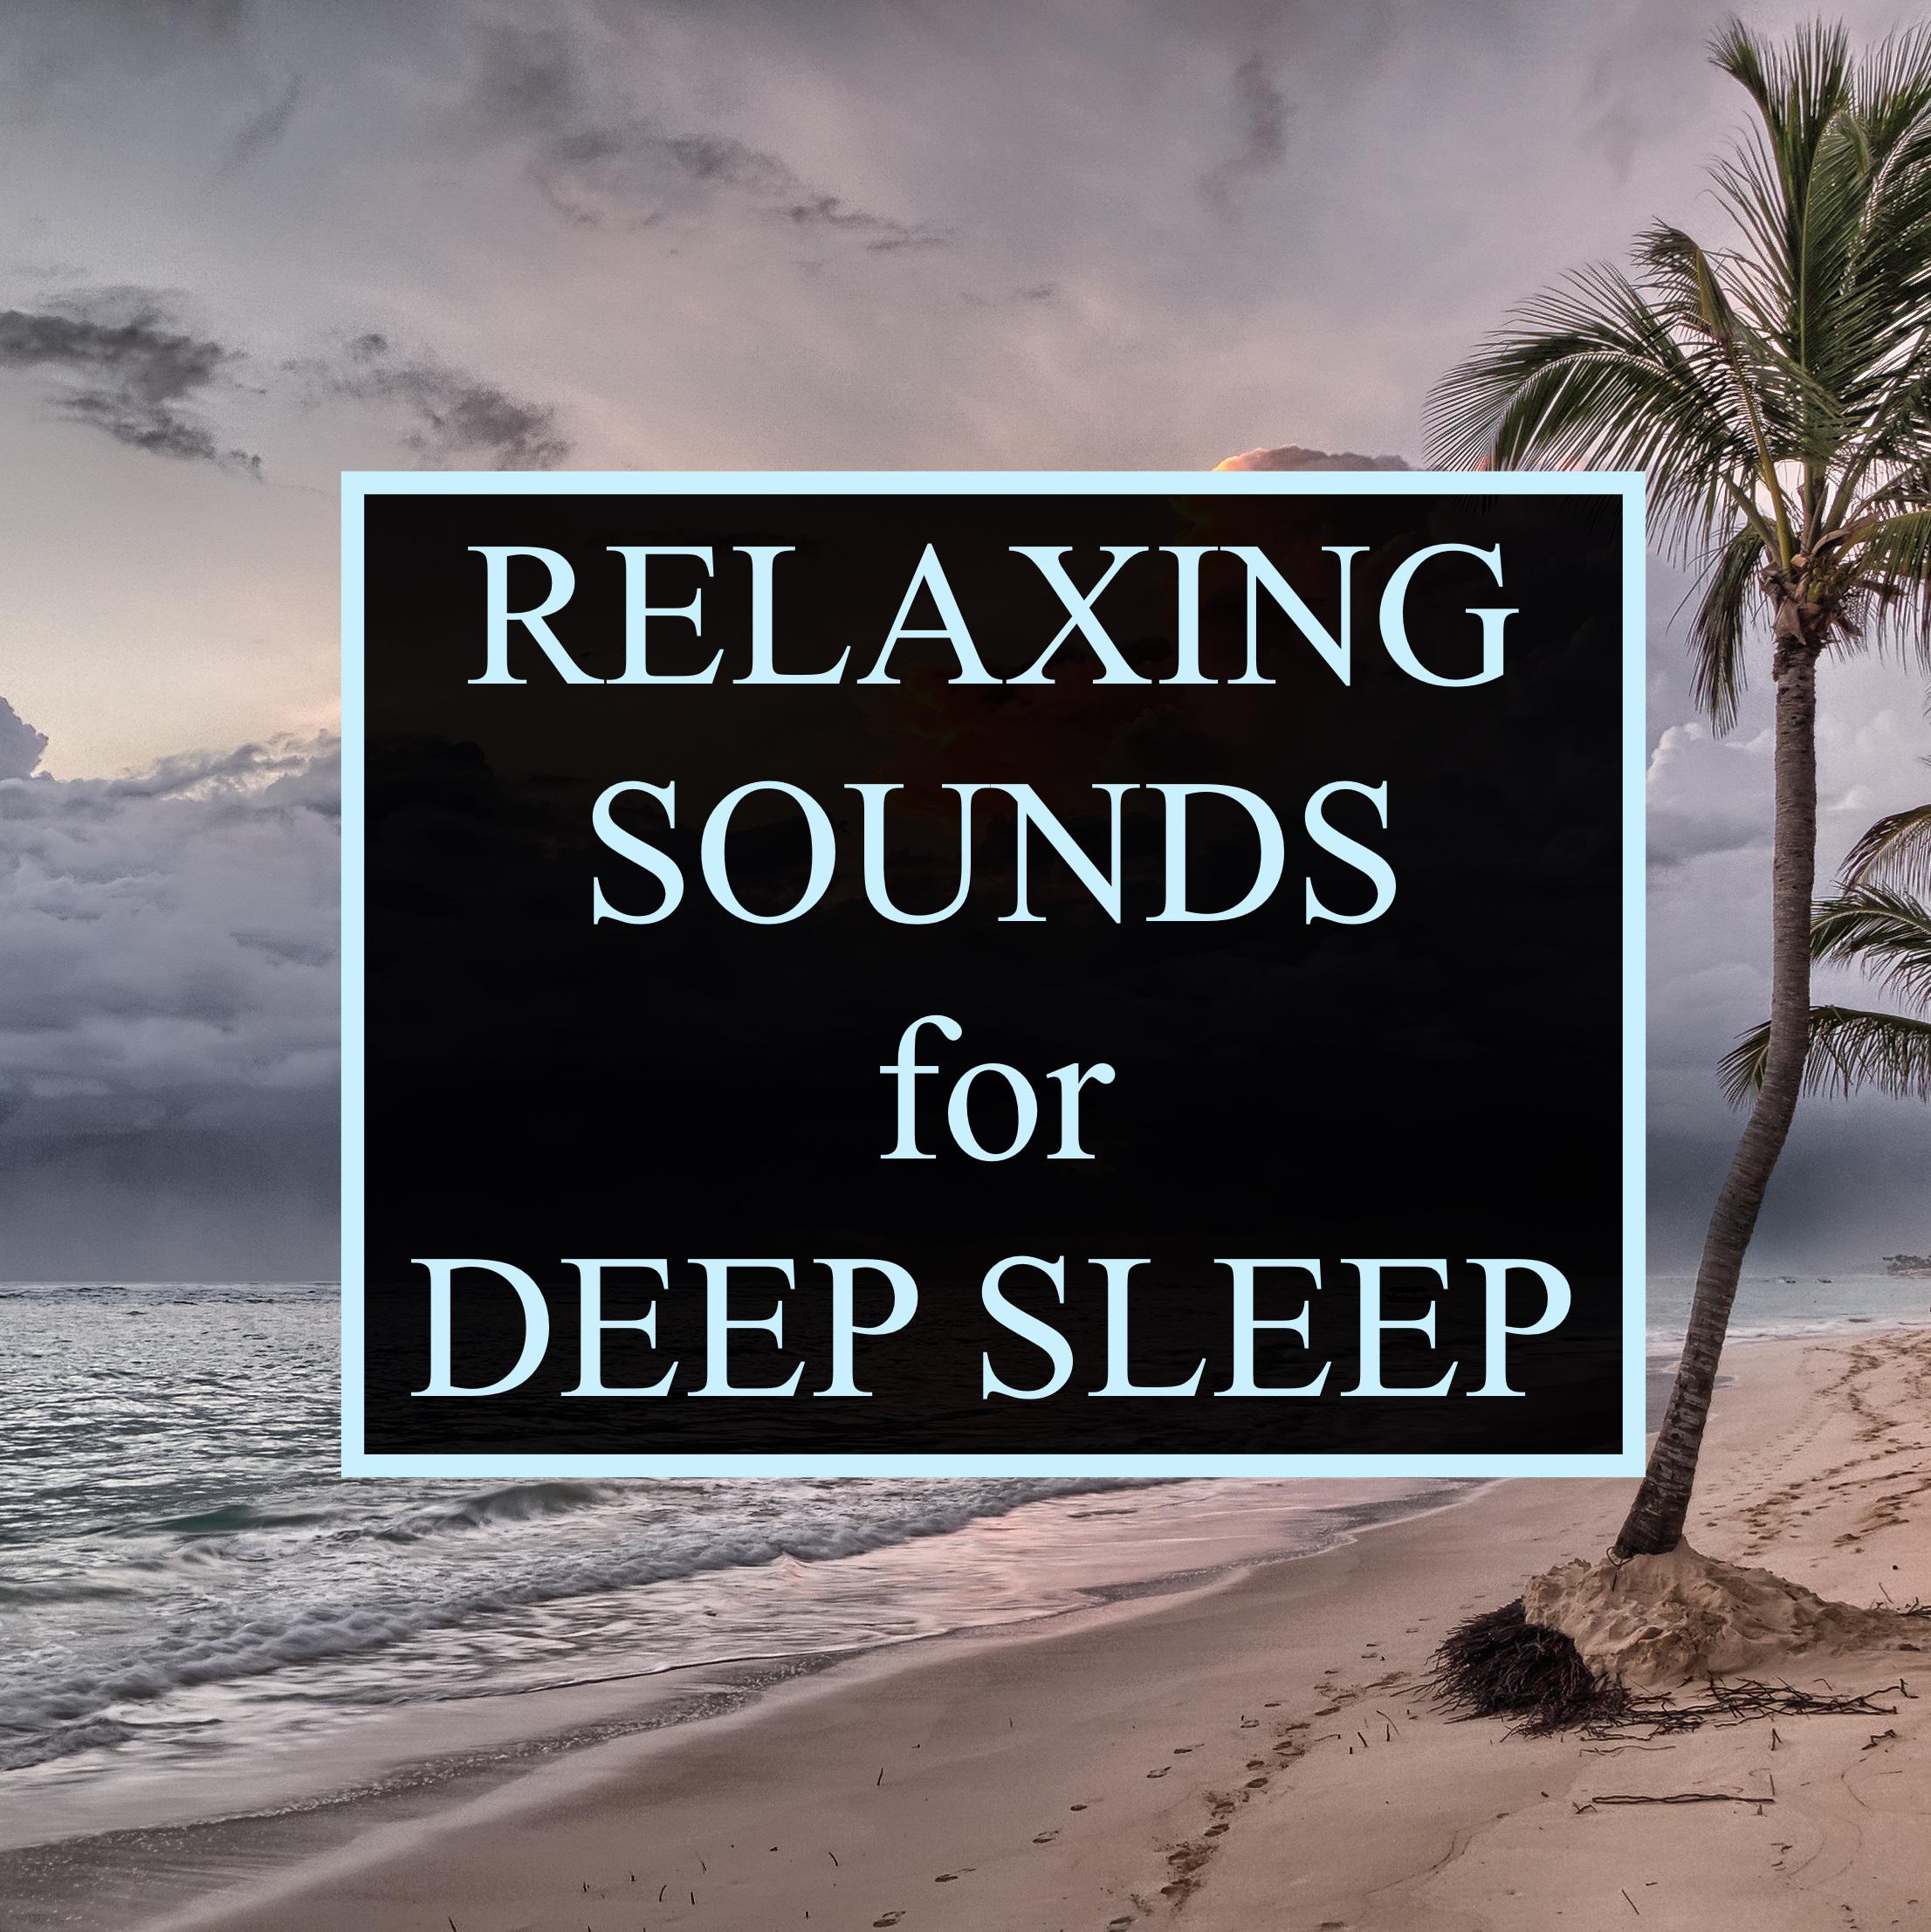 Relaxing Sounds - Essential Compilation of Sleep Sounds for Help with Meditation, Deep Sleep, Mindfulness and Natural Stress-Free Living